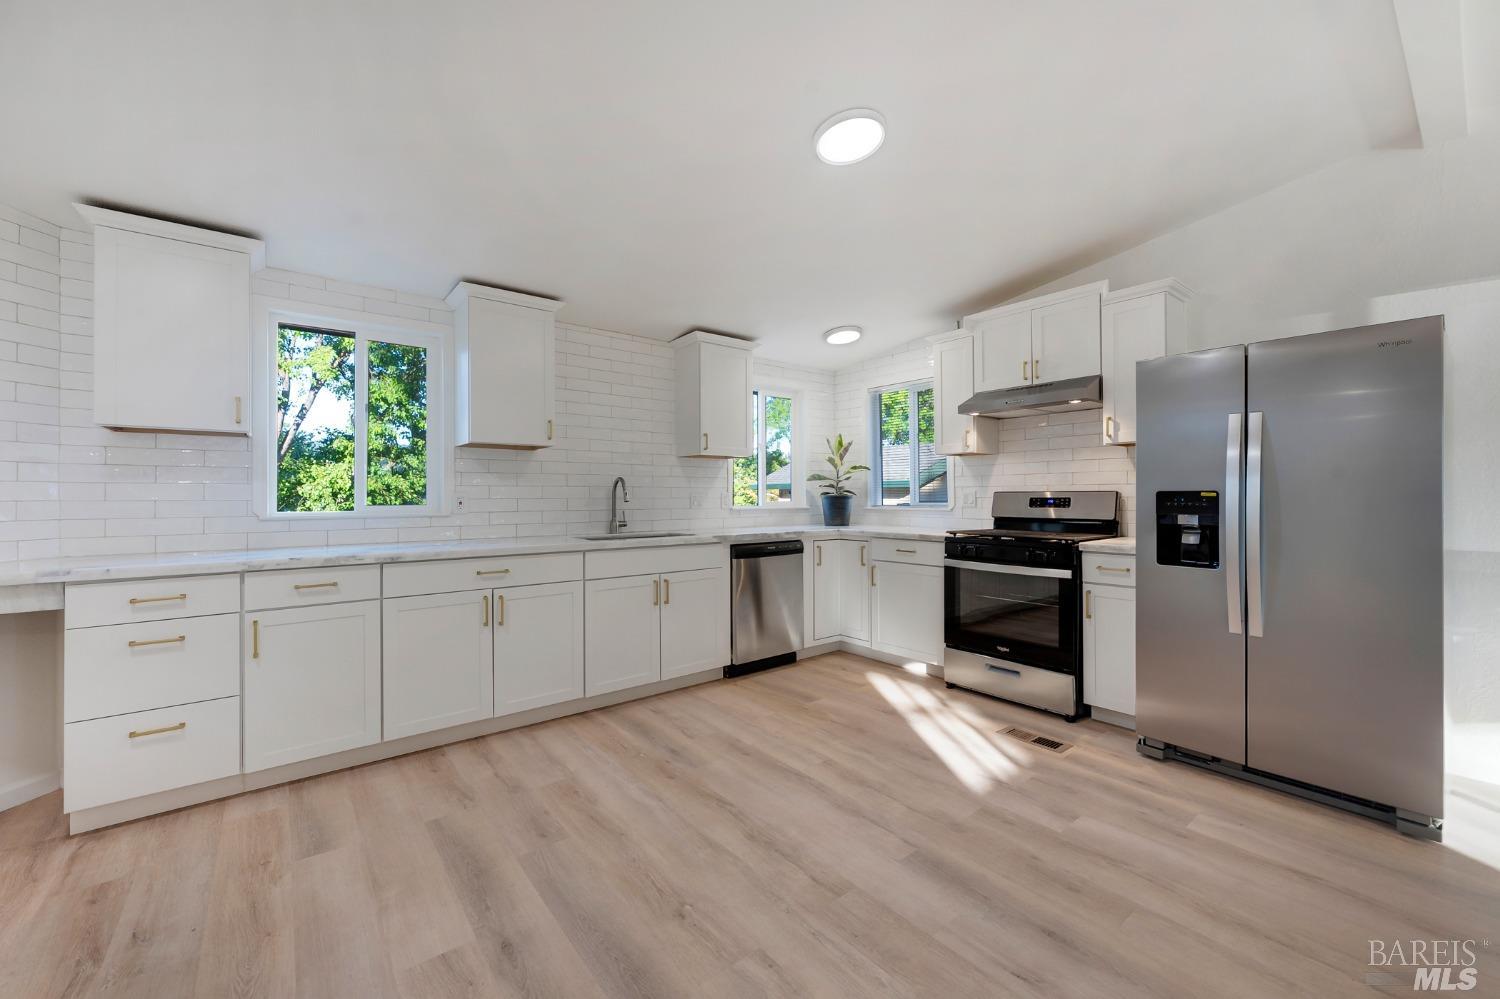 a kitchen with white cabinets stainless steel appliances and window